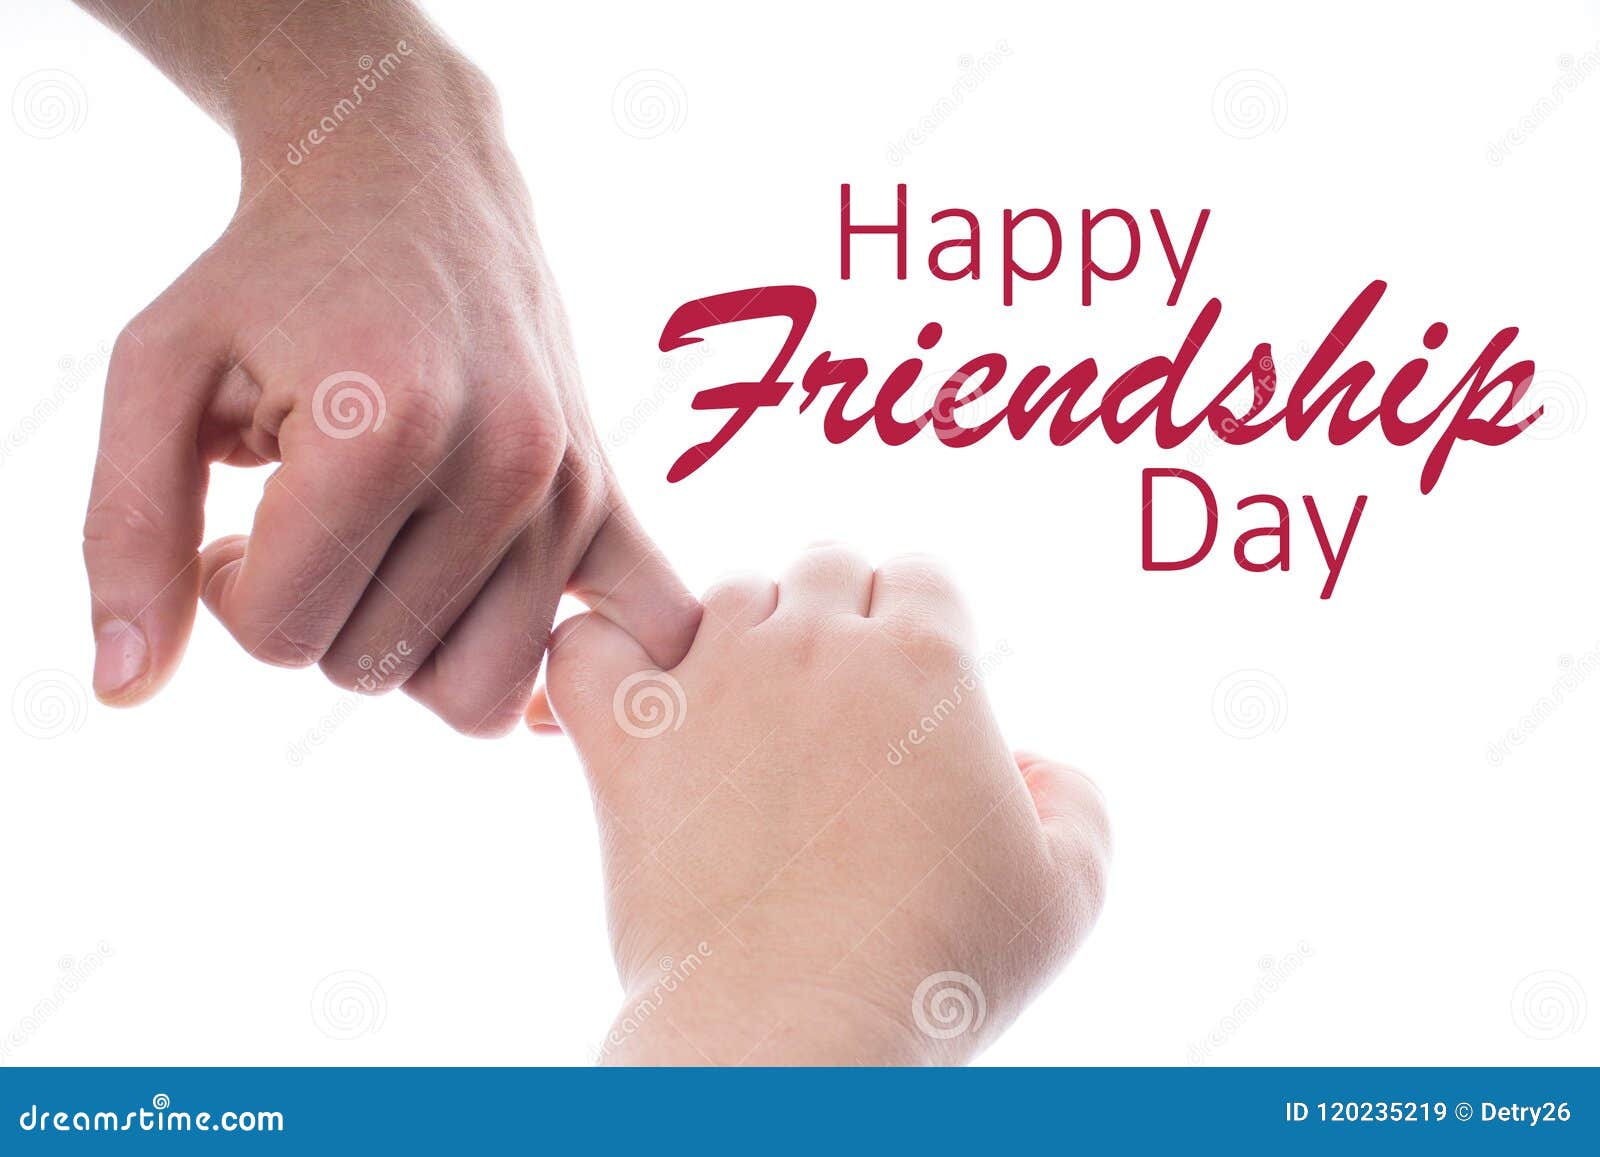 Friends Making a Pinkie Promise. Hands Isolated on White Background. Happy  International Friendship Day. Stock Image - Image of caucasian, assistance:  120235219